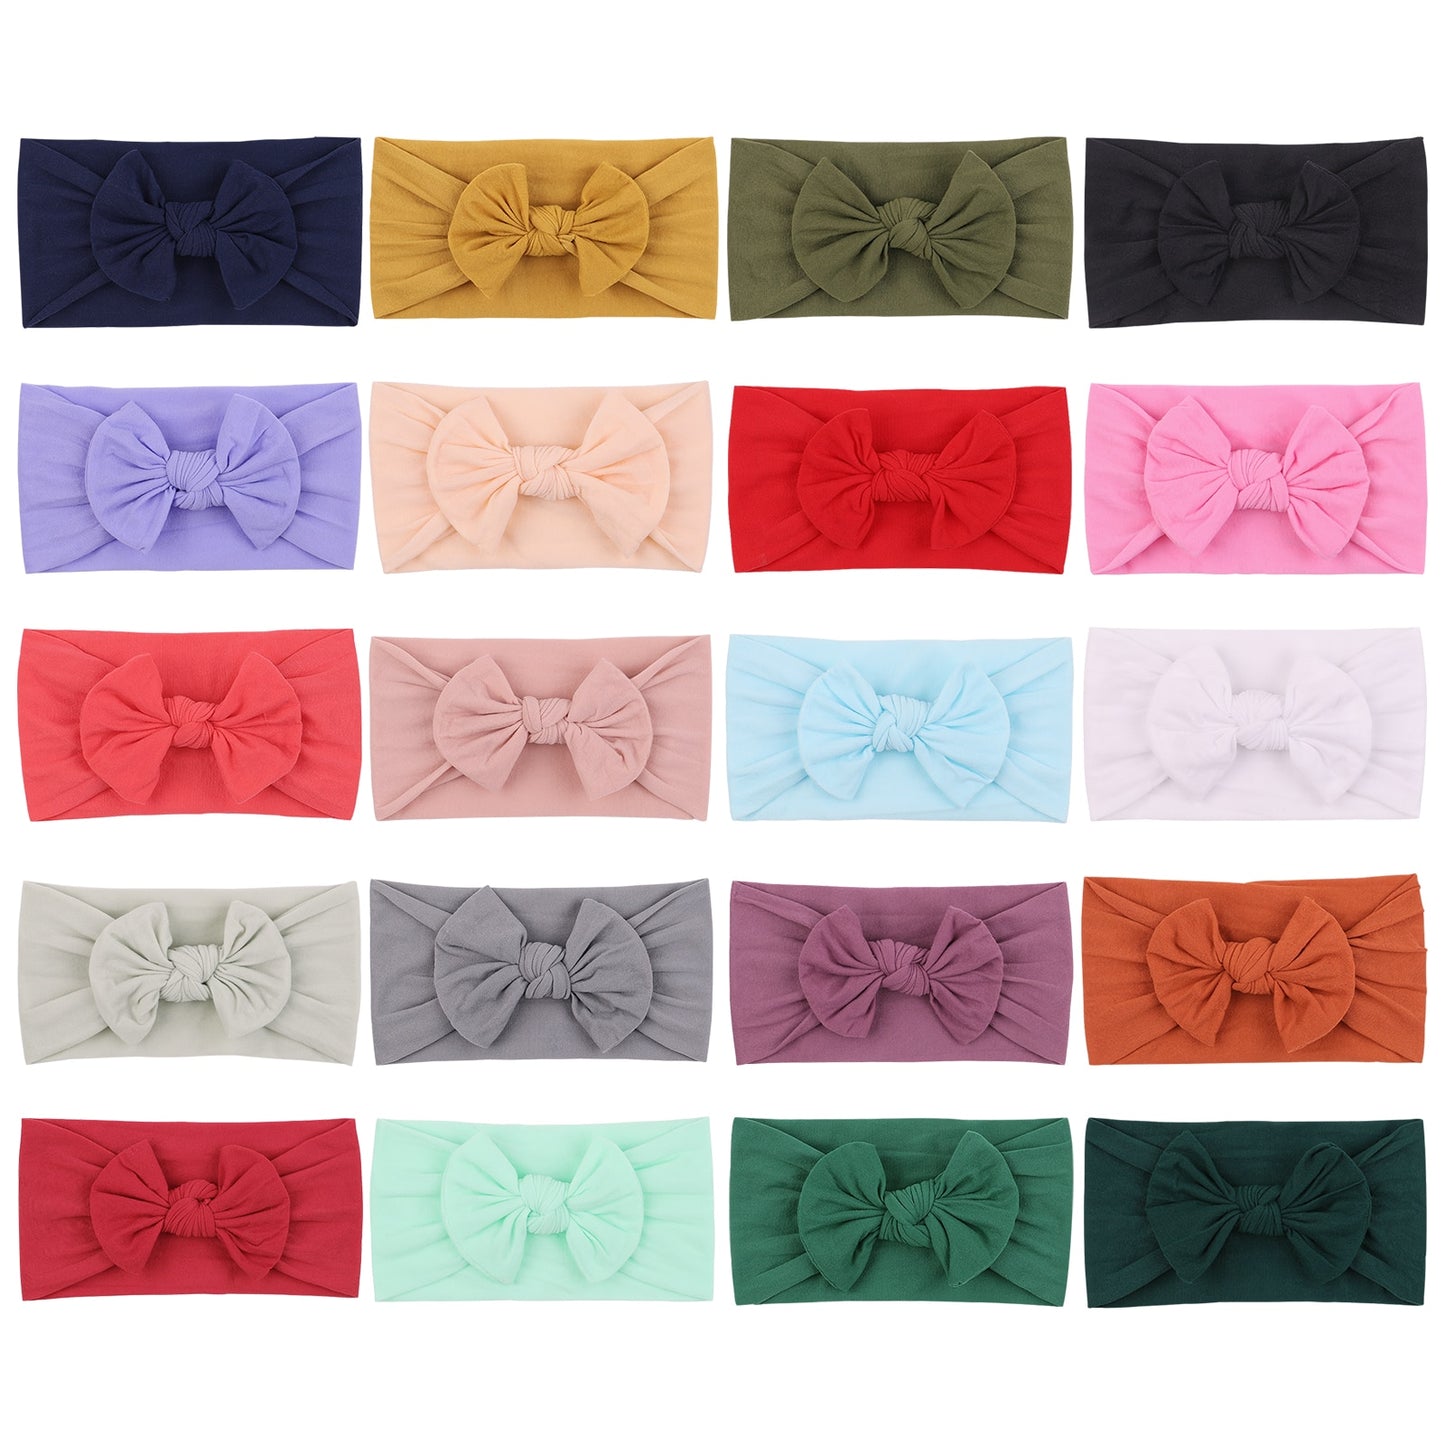 Solid Color Broadside Bowknot Headband for Kids Girls Elastic Hair Band Baby Hairband Boutique Turban Headwear Hair Accessories